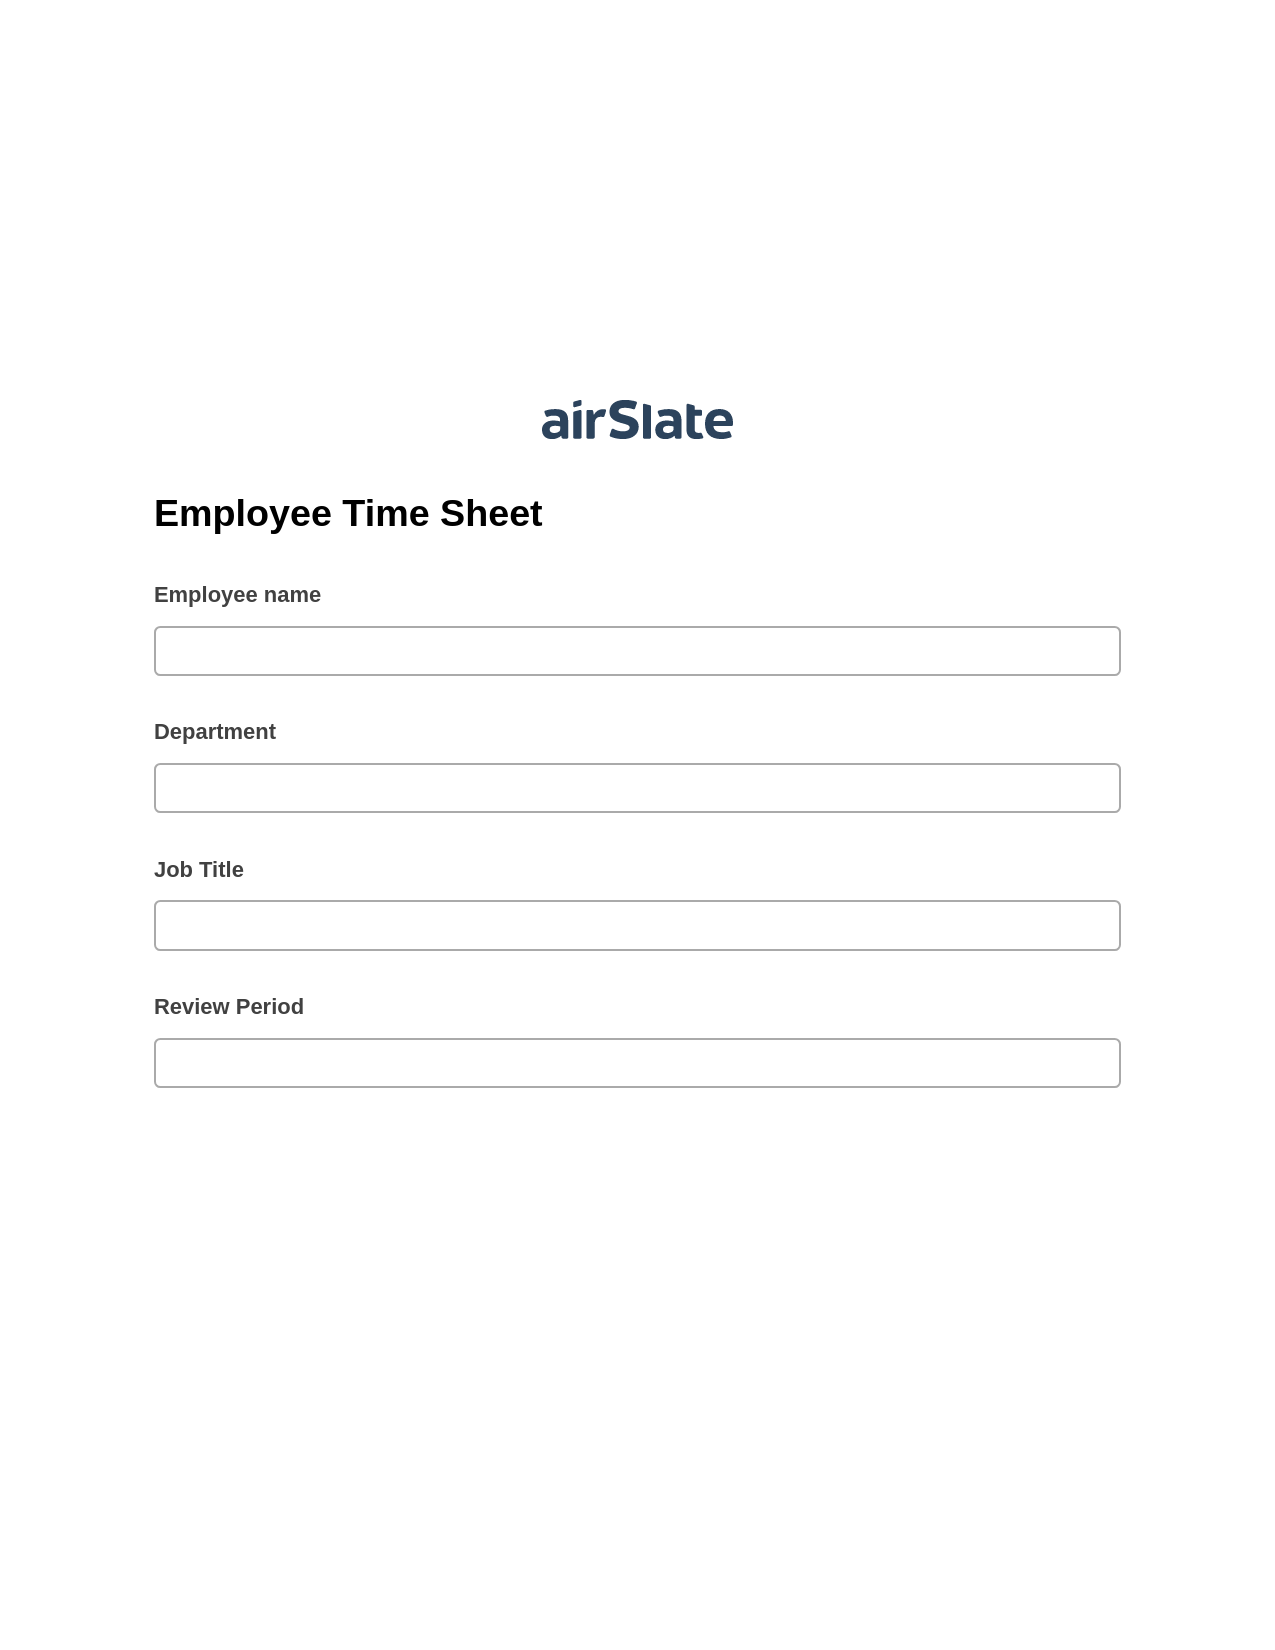 Employee Time Sheet Pre-fill Dropdowns from CSV file Bot, Create Salesforce Records Bot, Archive to Dropbox Bot